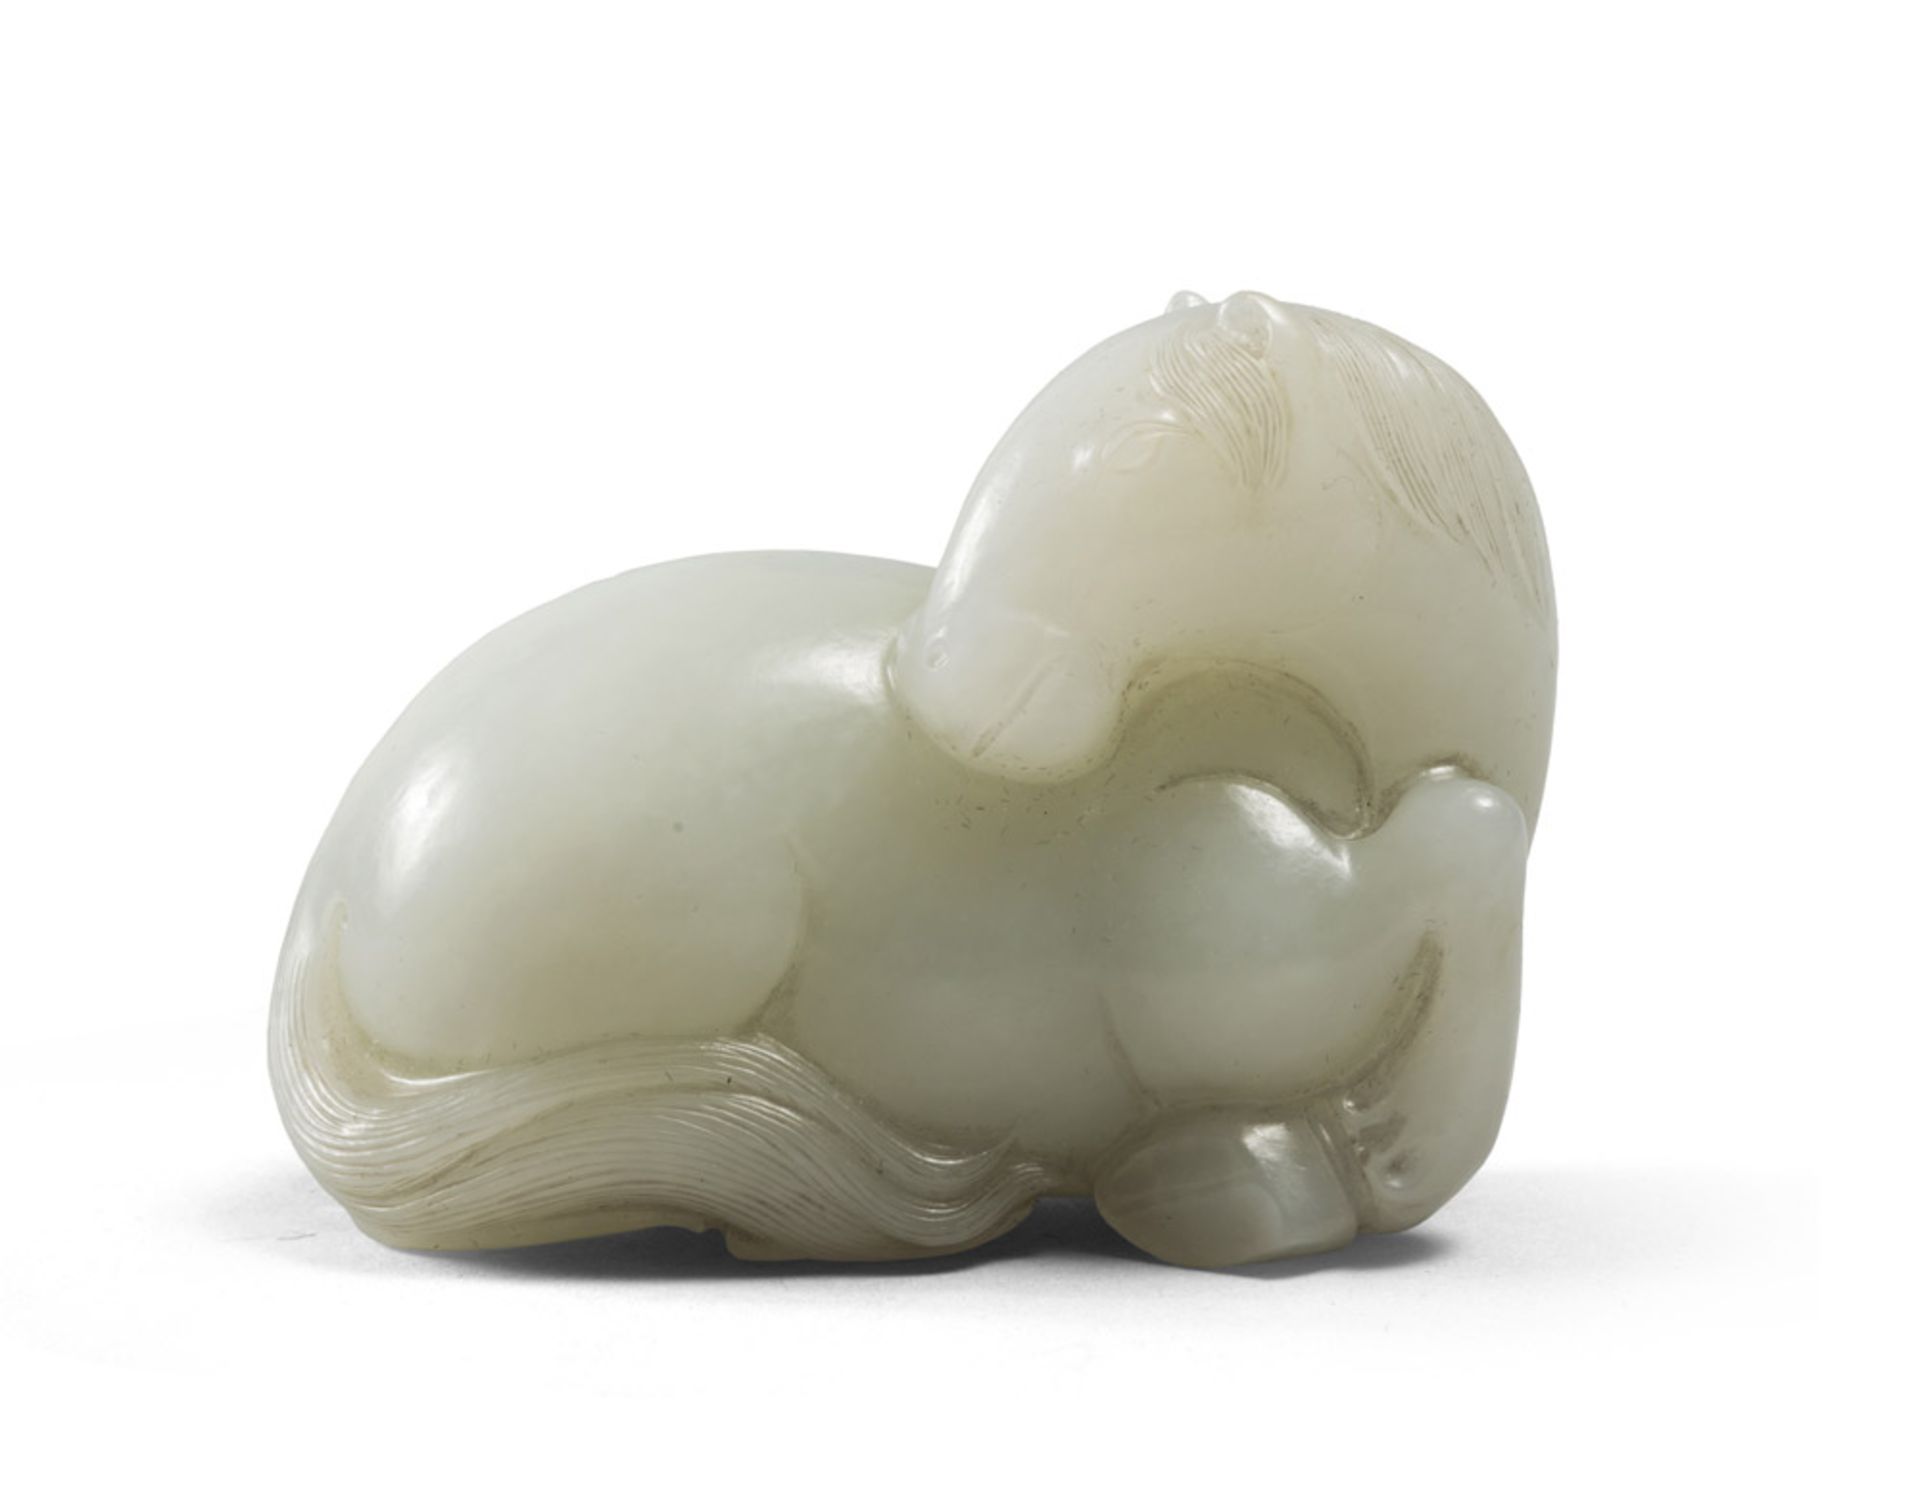 A CHINESE JADE SCULPTURE, 18TH CENTURY